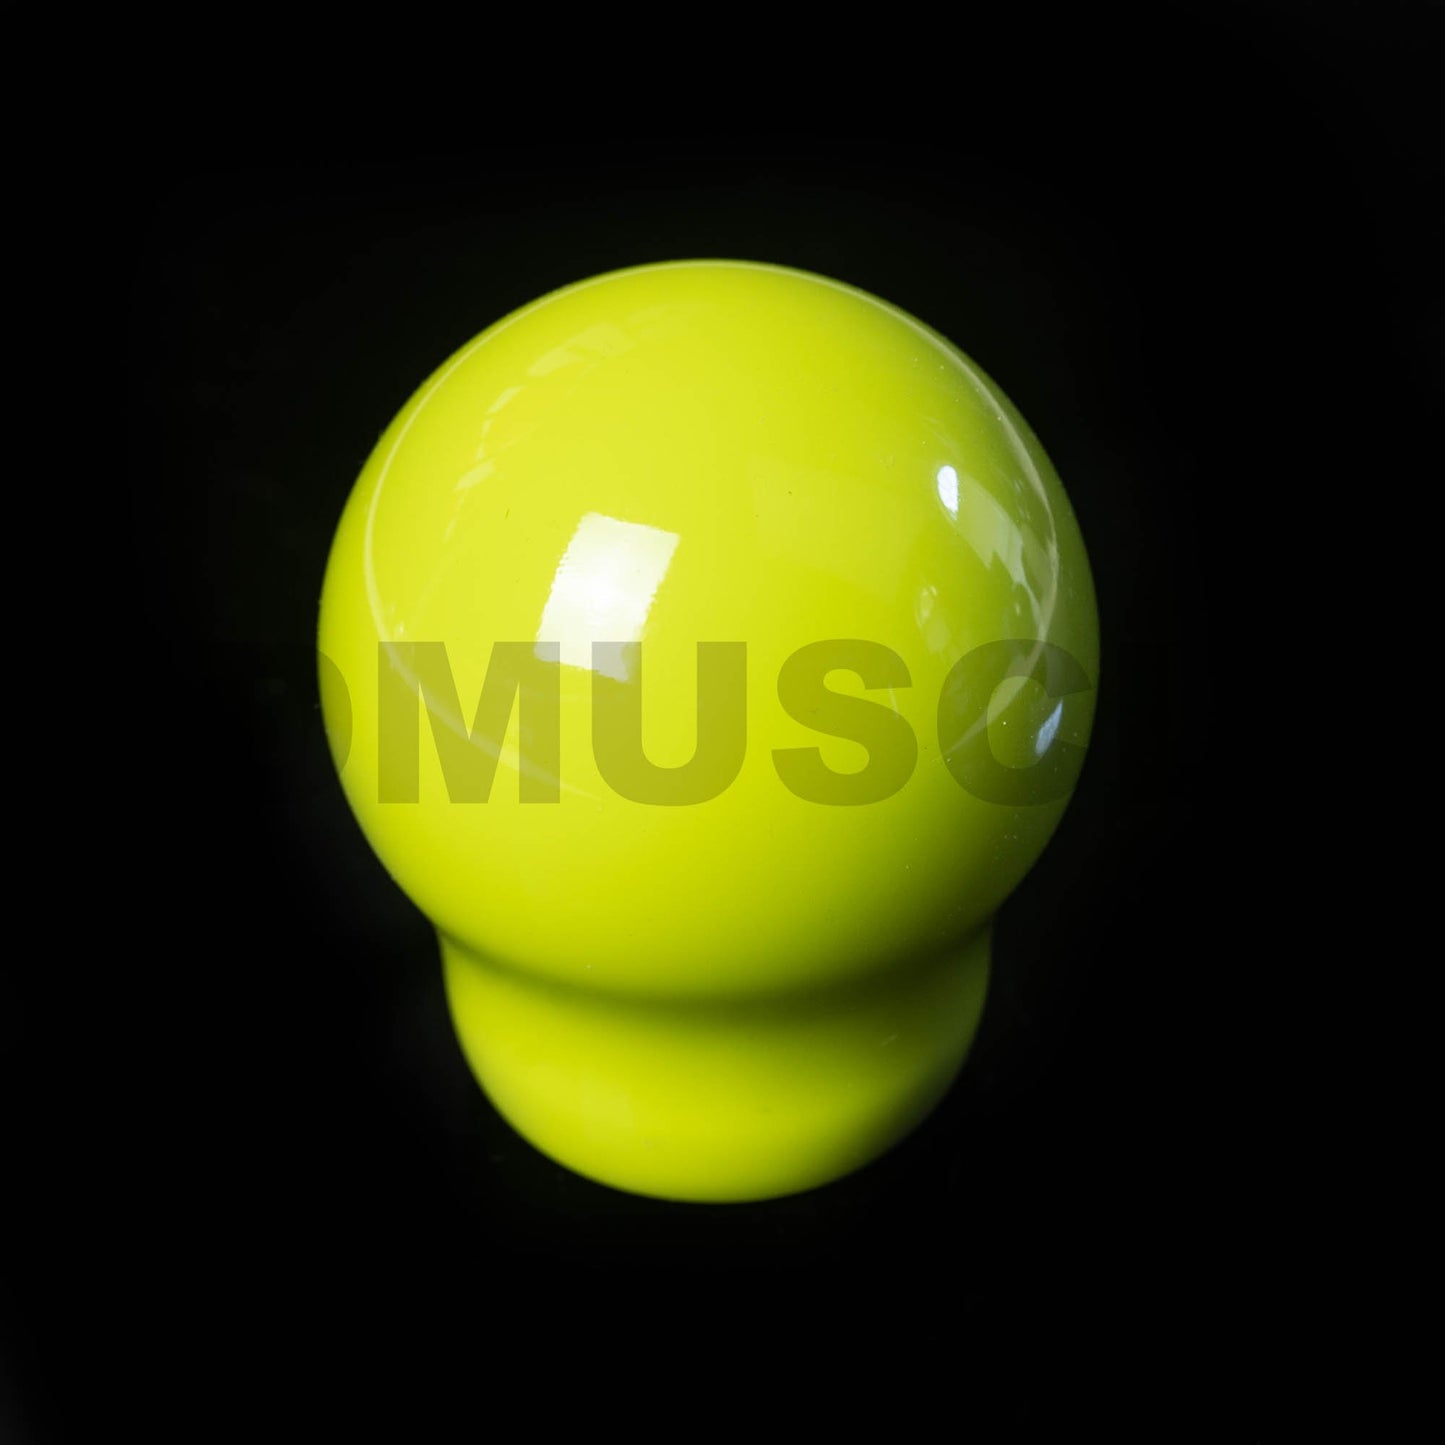 JDMuscle Customized Shift Knob - Carbon/Leather/Alcantara/Paint-Matched-Shift Knobs-JDMuscle-JDMuscle